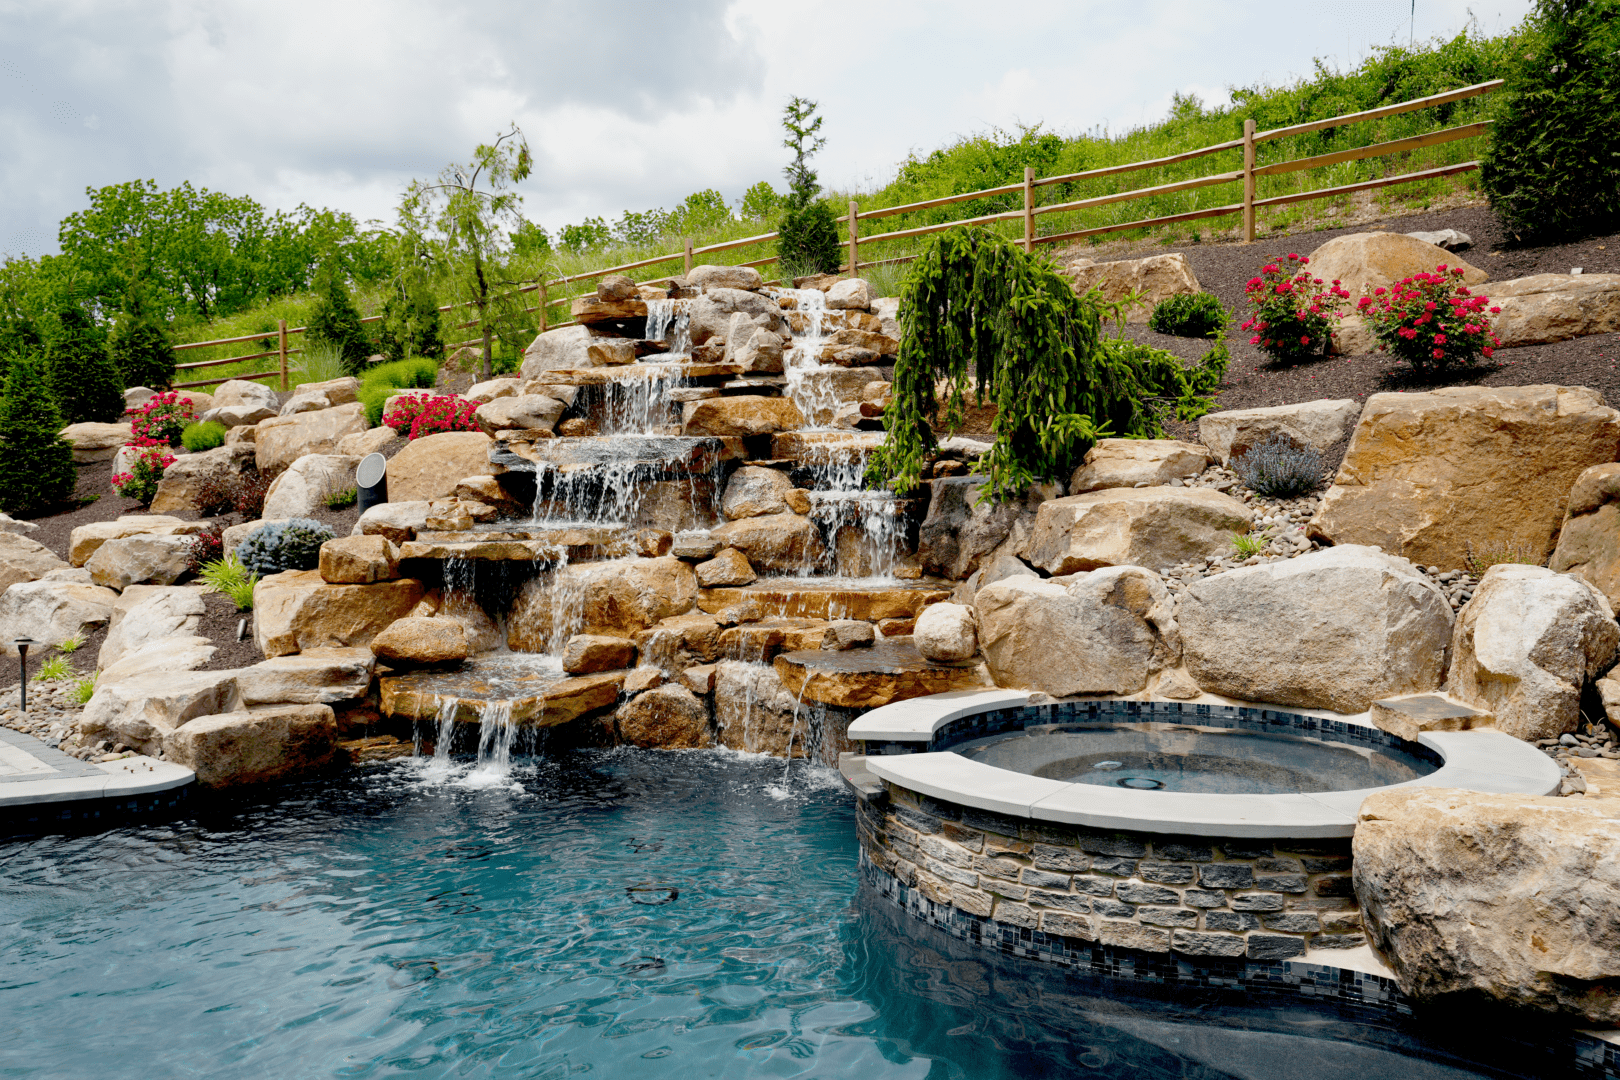 A pool with water features, including a waterfall.